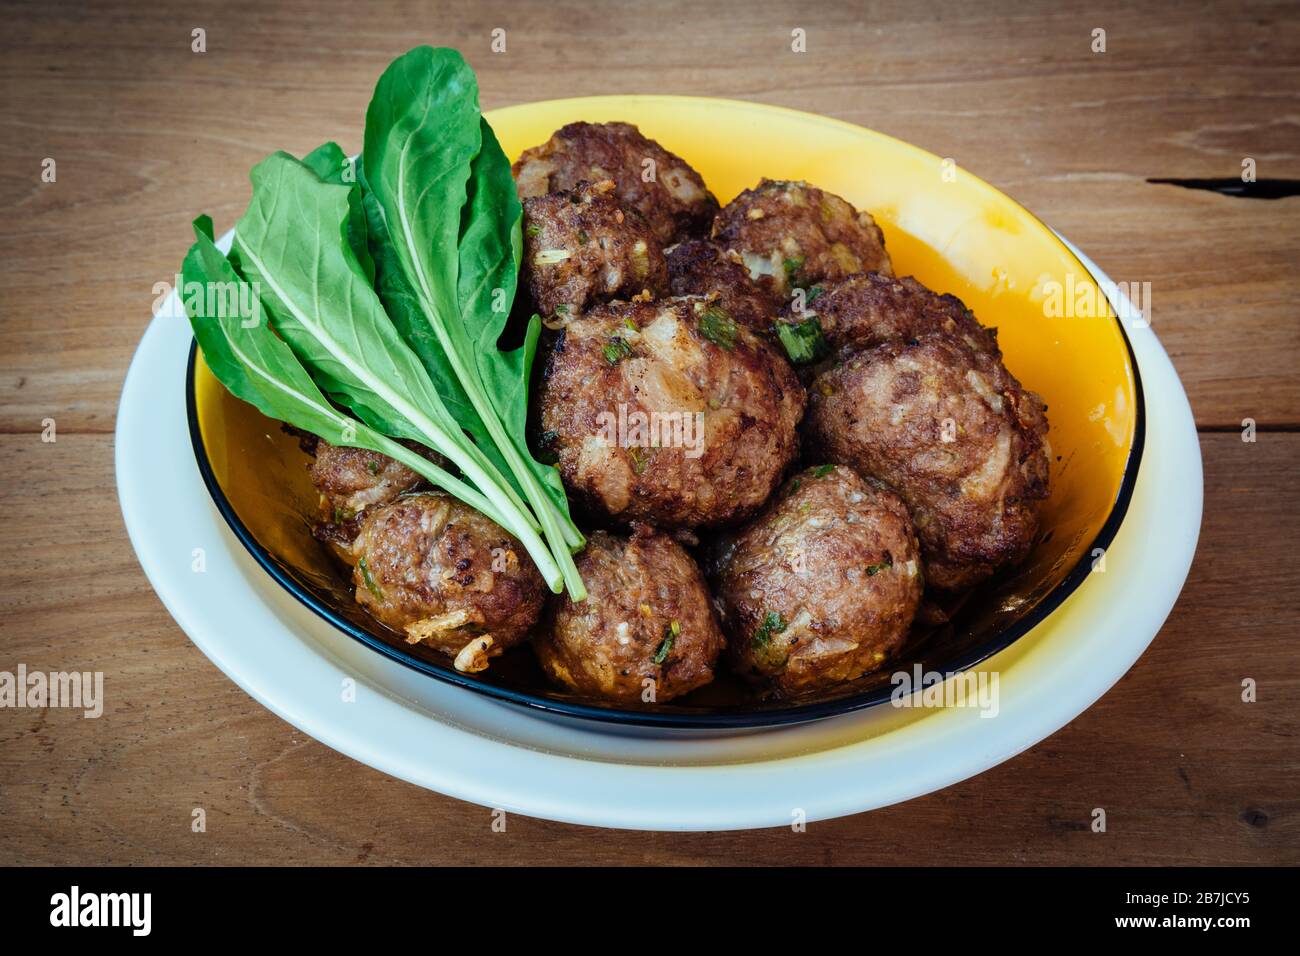 Beef meatballs and raw fresh arucula leaf vegetable, ready to eat, in plate on rustic wooden table Stock Photo